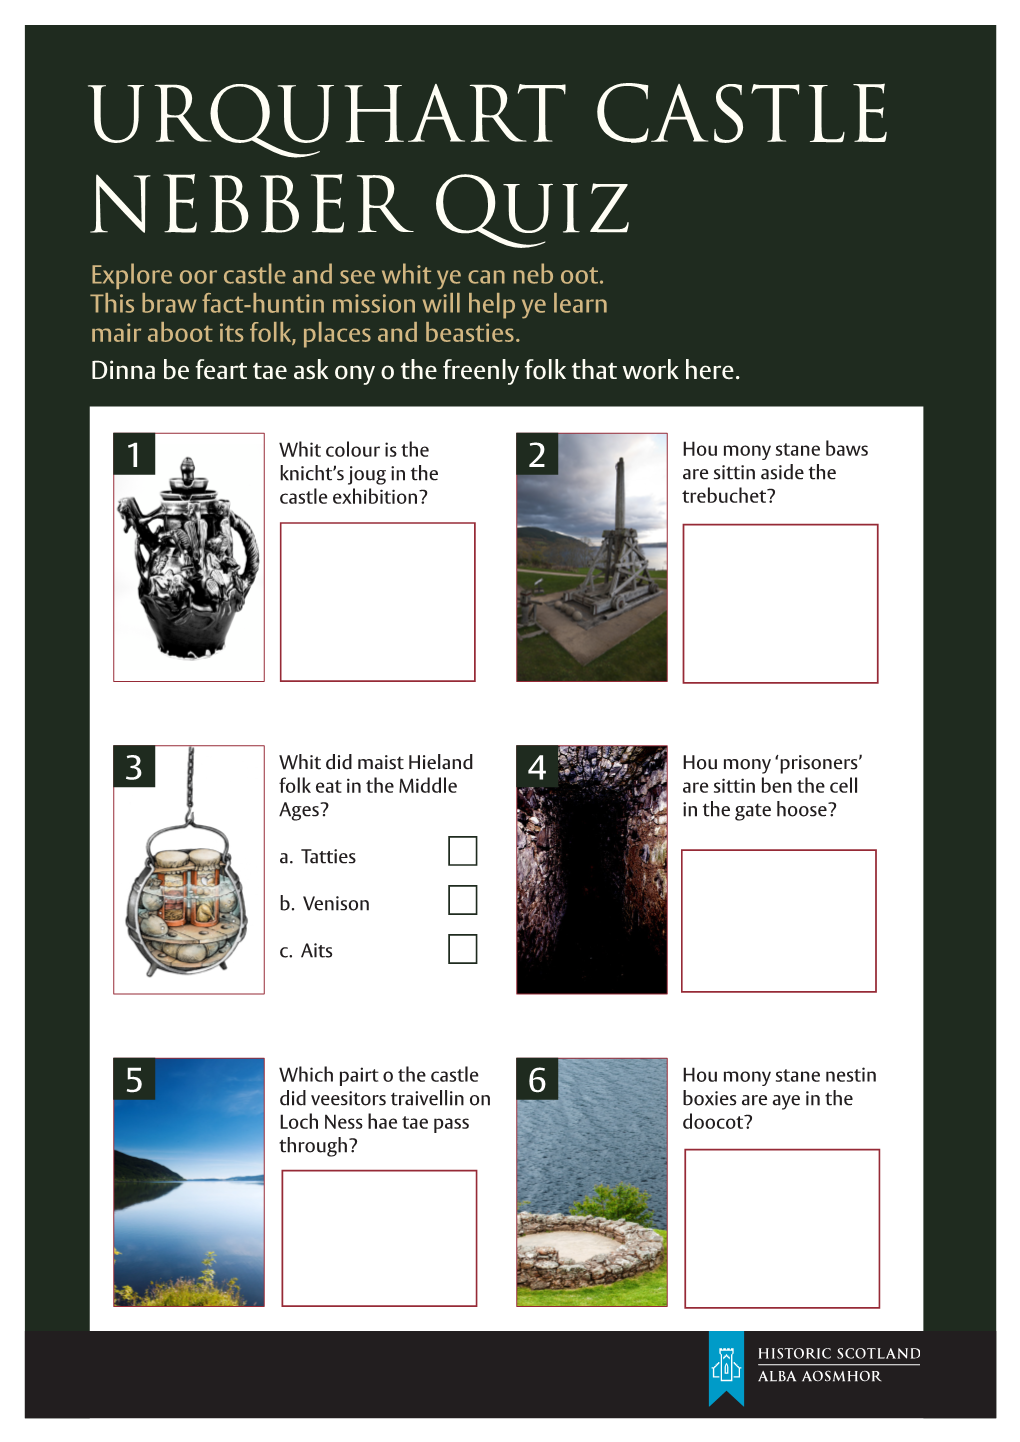 URQUHART CASTLE NEBBER Quiz Explore Oor Castle and See Whit Ye Can Neb Oot